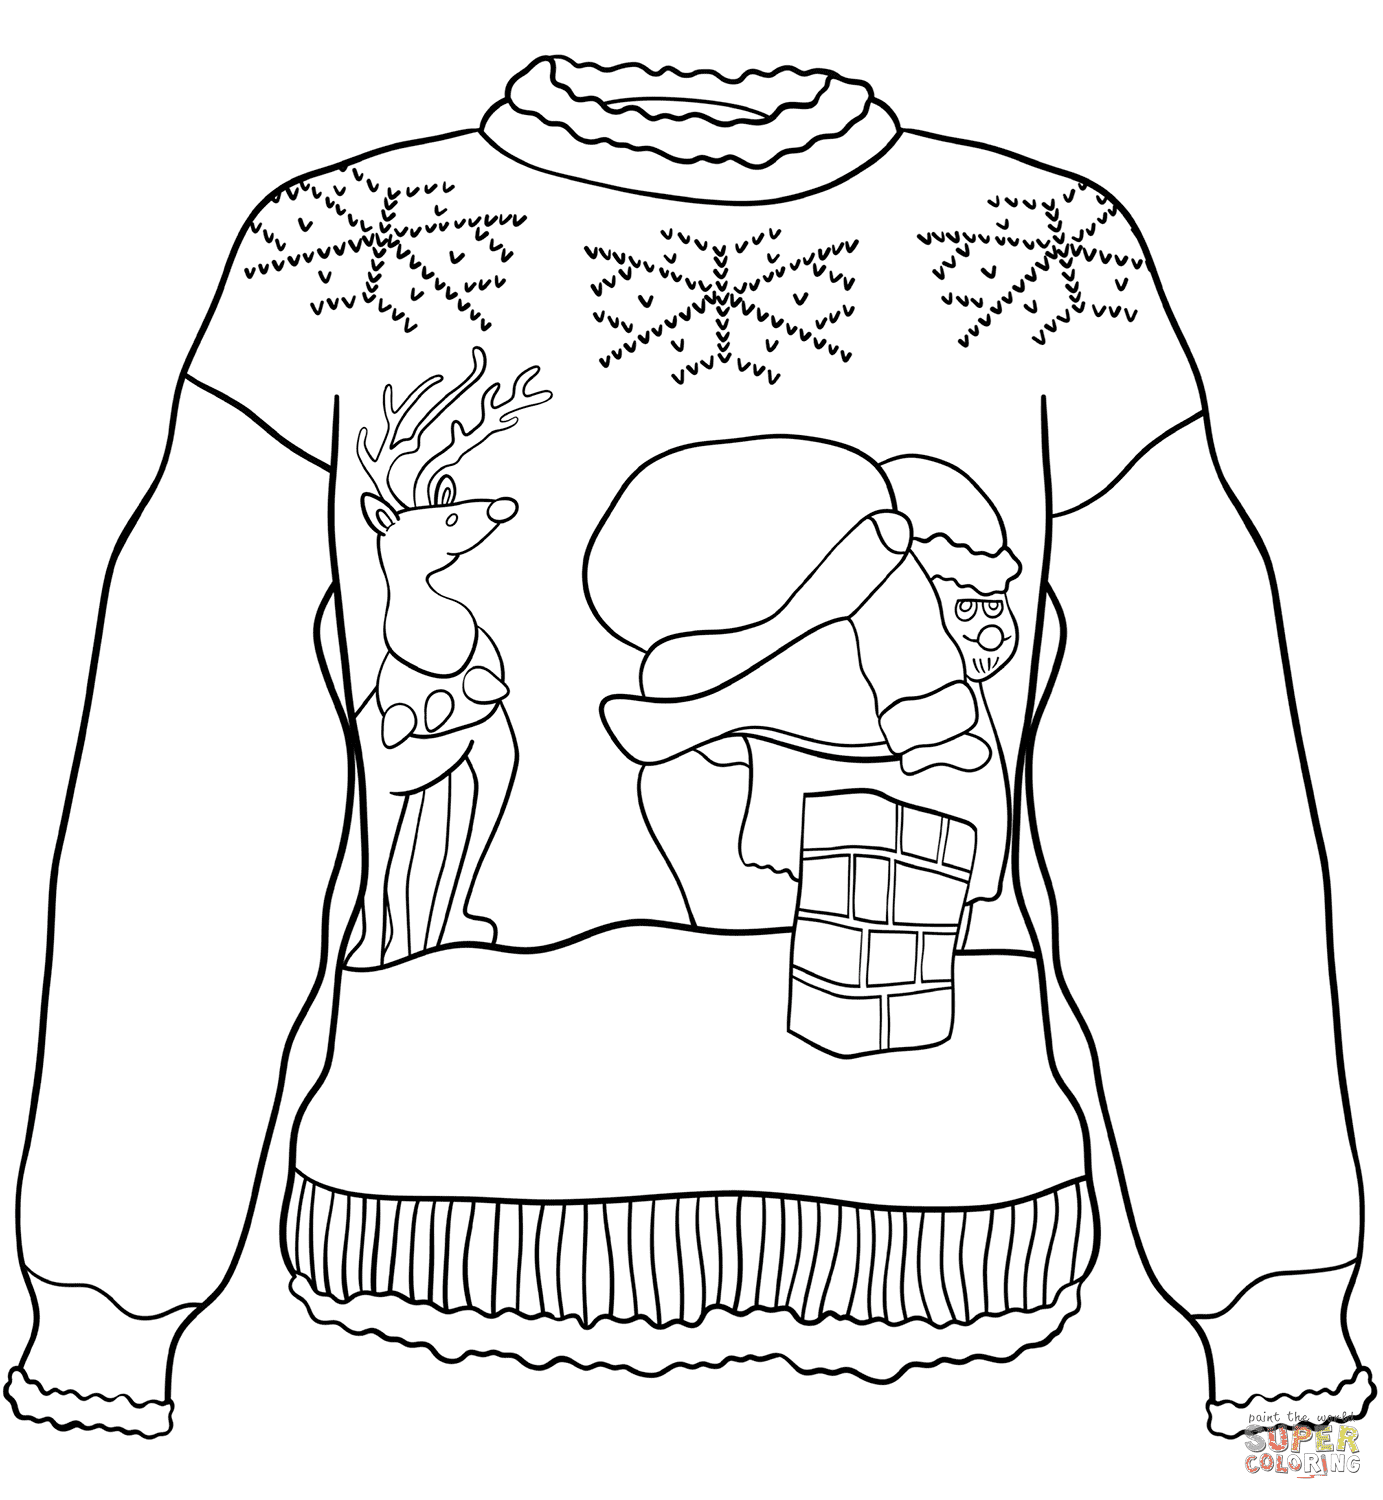 Christmas Sweater with Santa on Rooftop Coloring Page